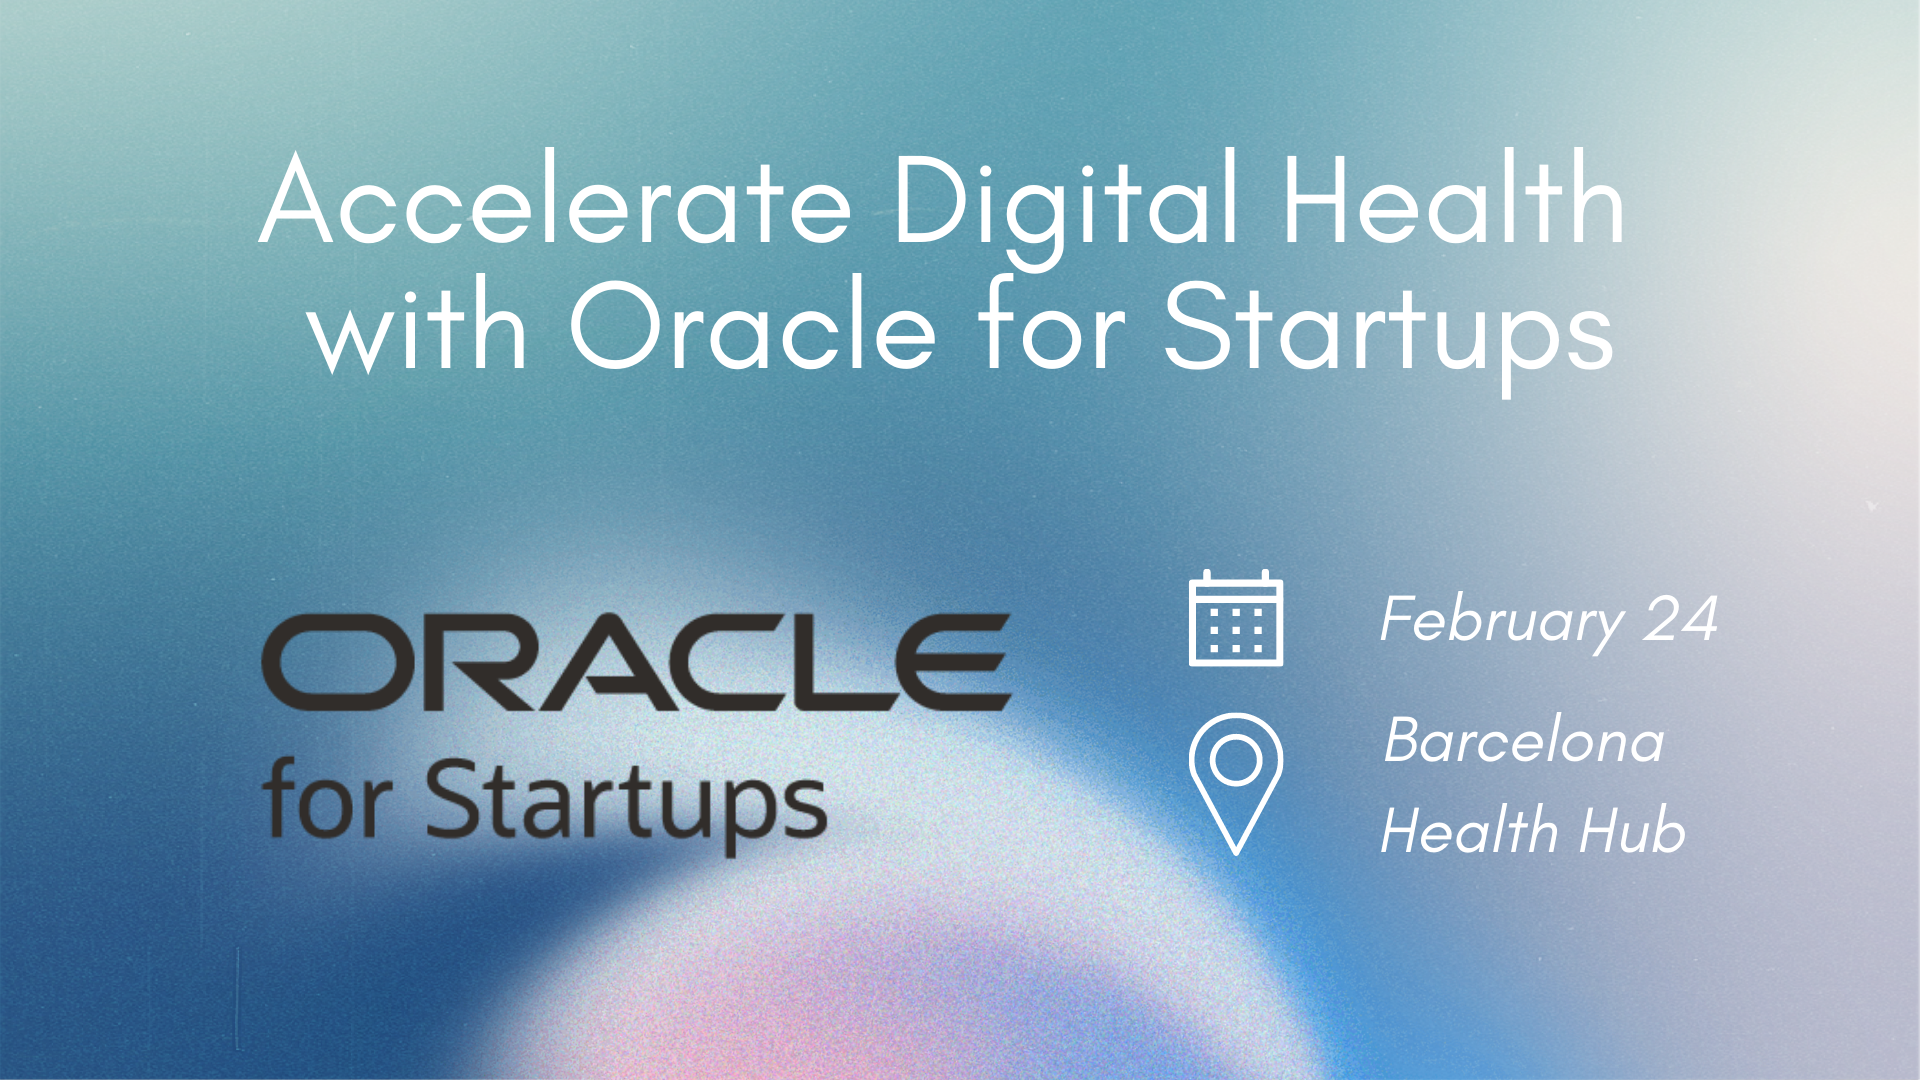 Live event: Accelerate Digital Health with Oracle for Startups on February 24 at the BHH Headquarters!